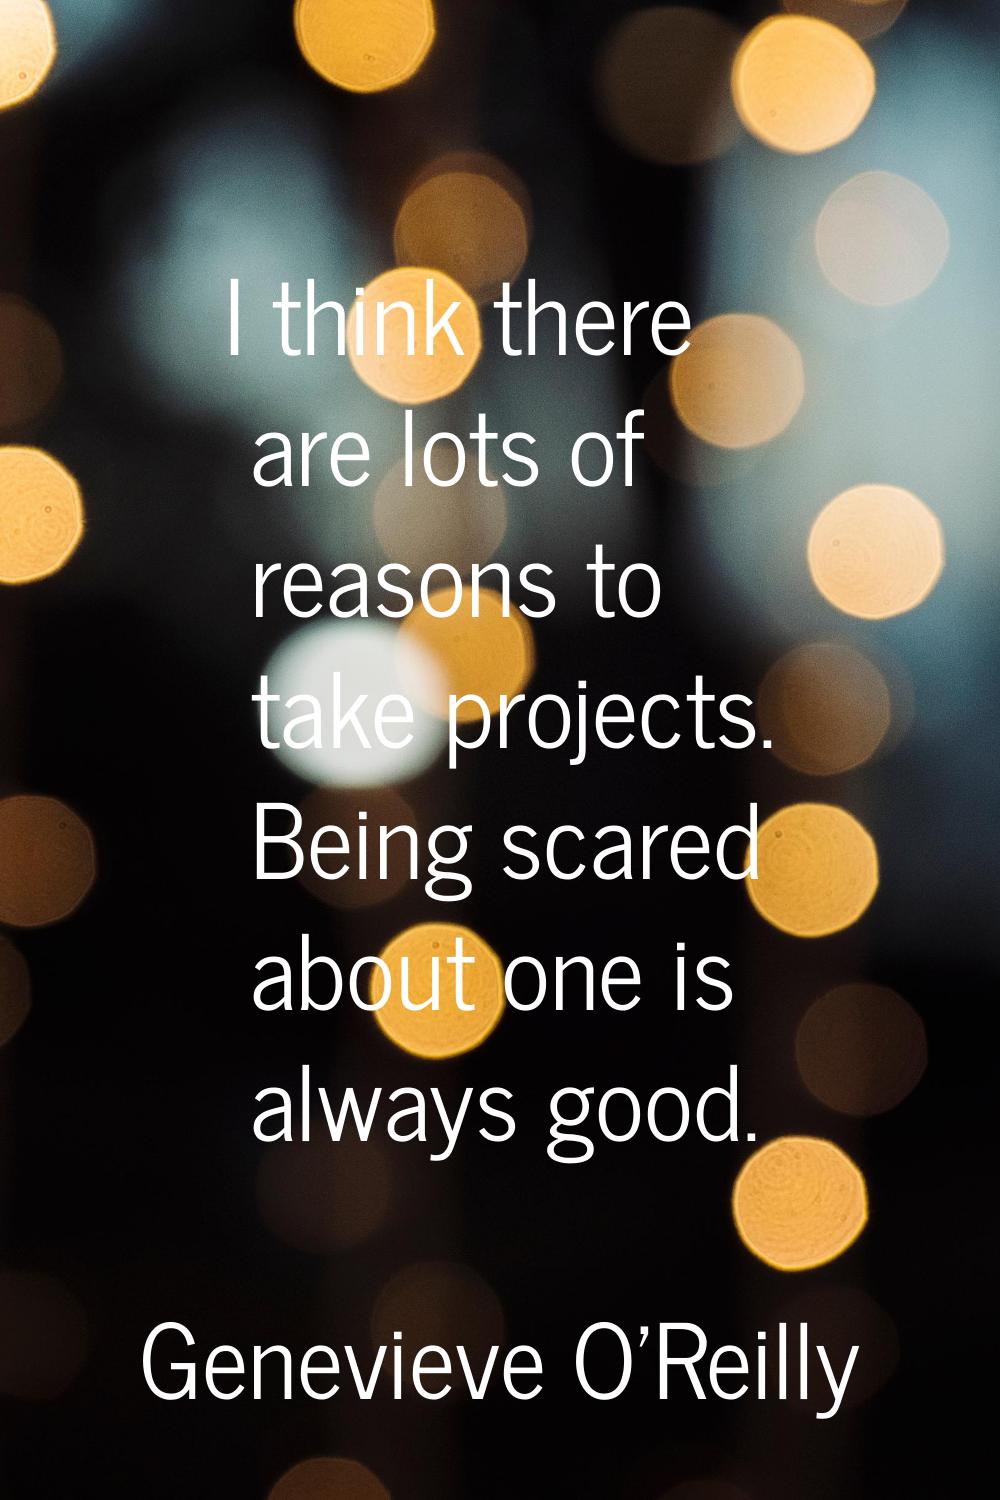 I think there are lots of reasons to take projects. Being scared about one is always good.